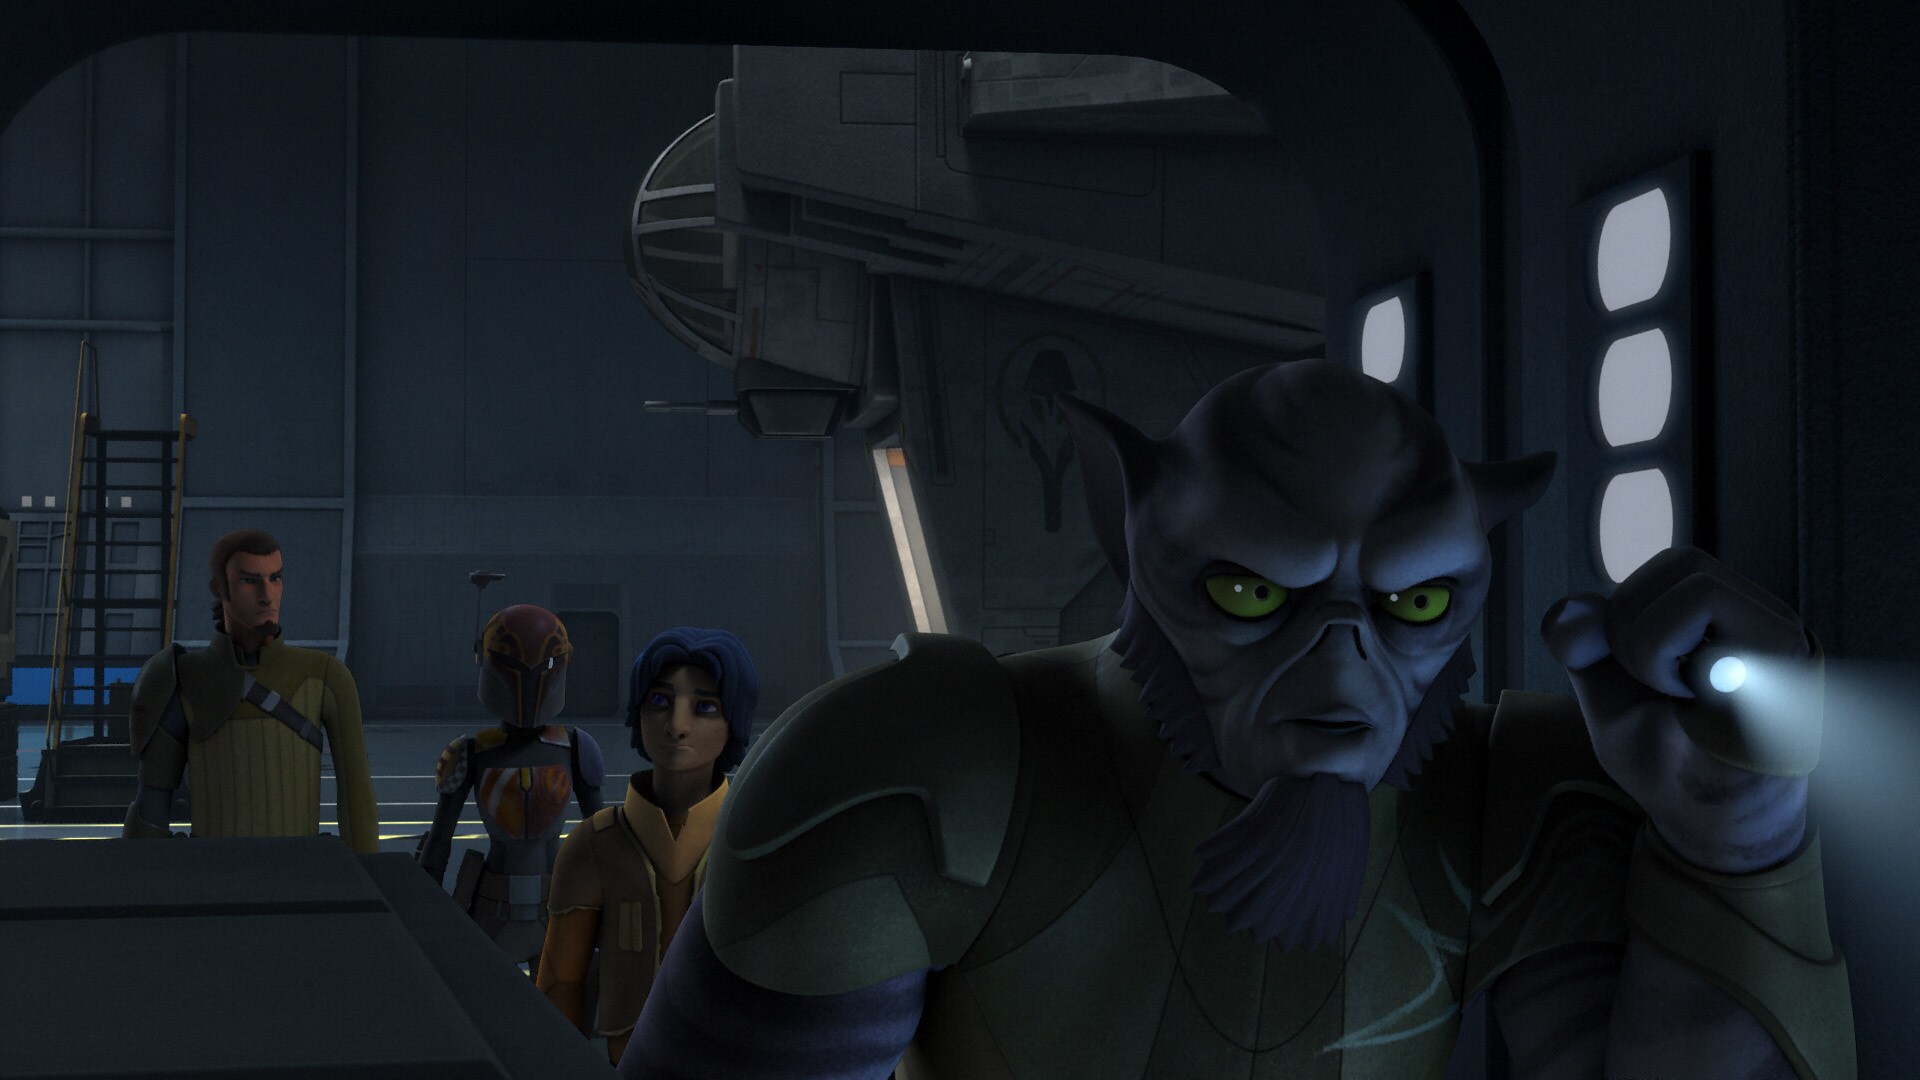 The base is unusually quiet. "My gut tells me this is a trap," says Zeb.